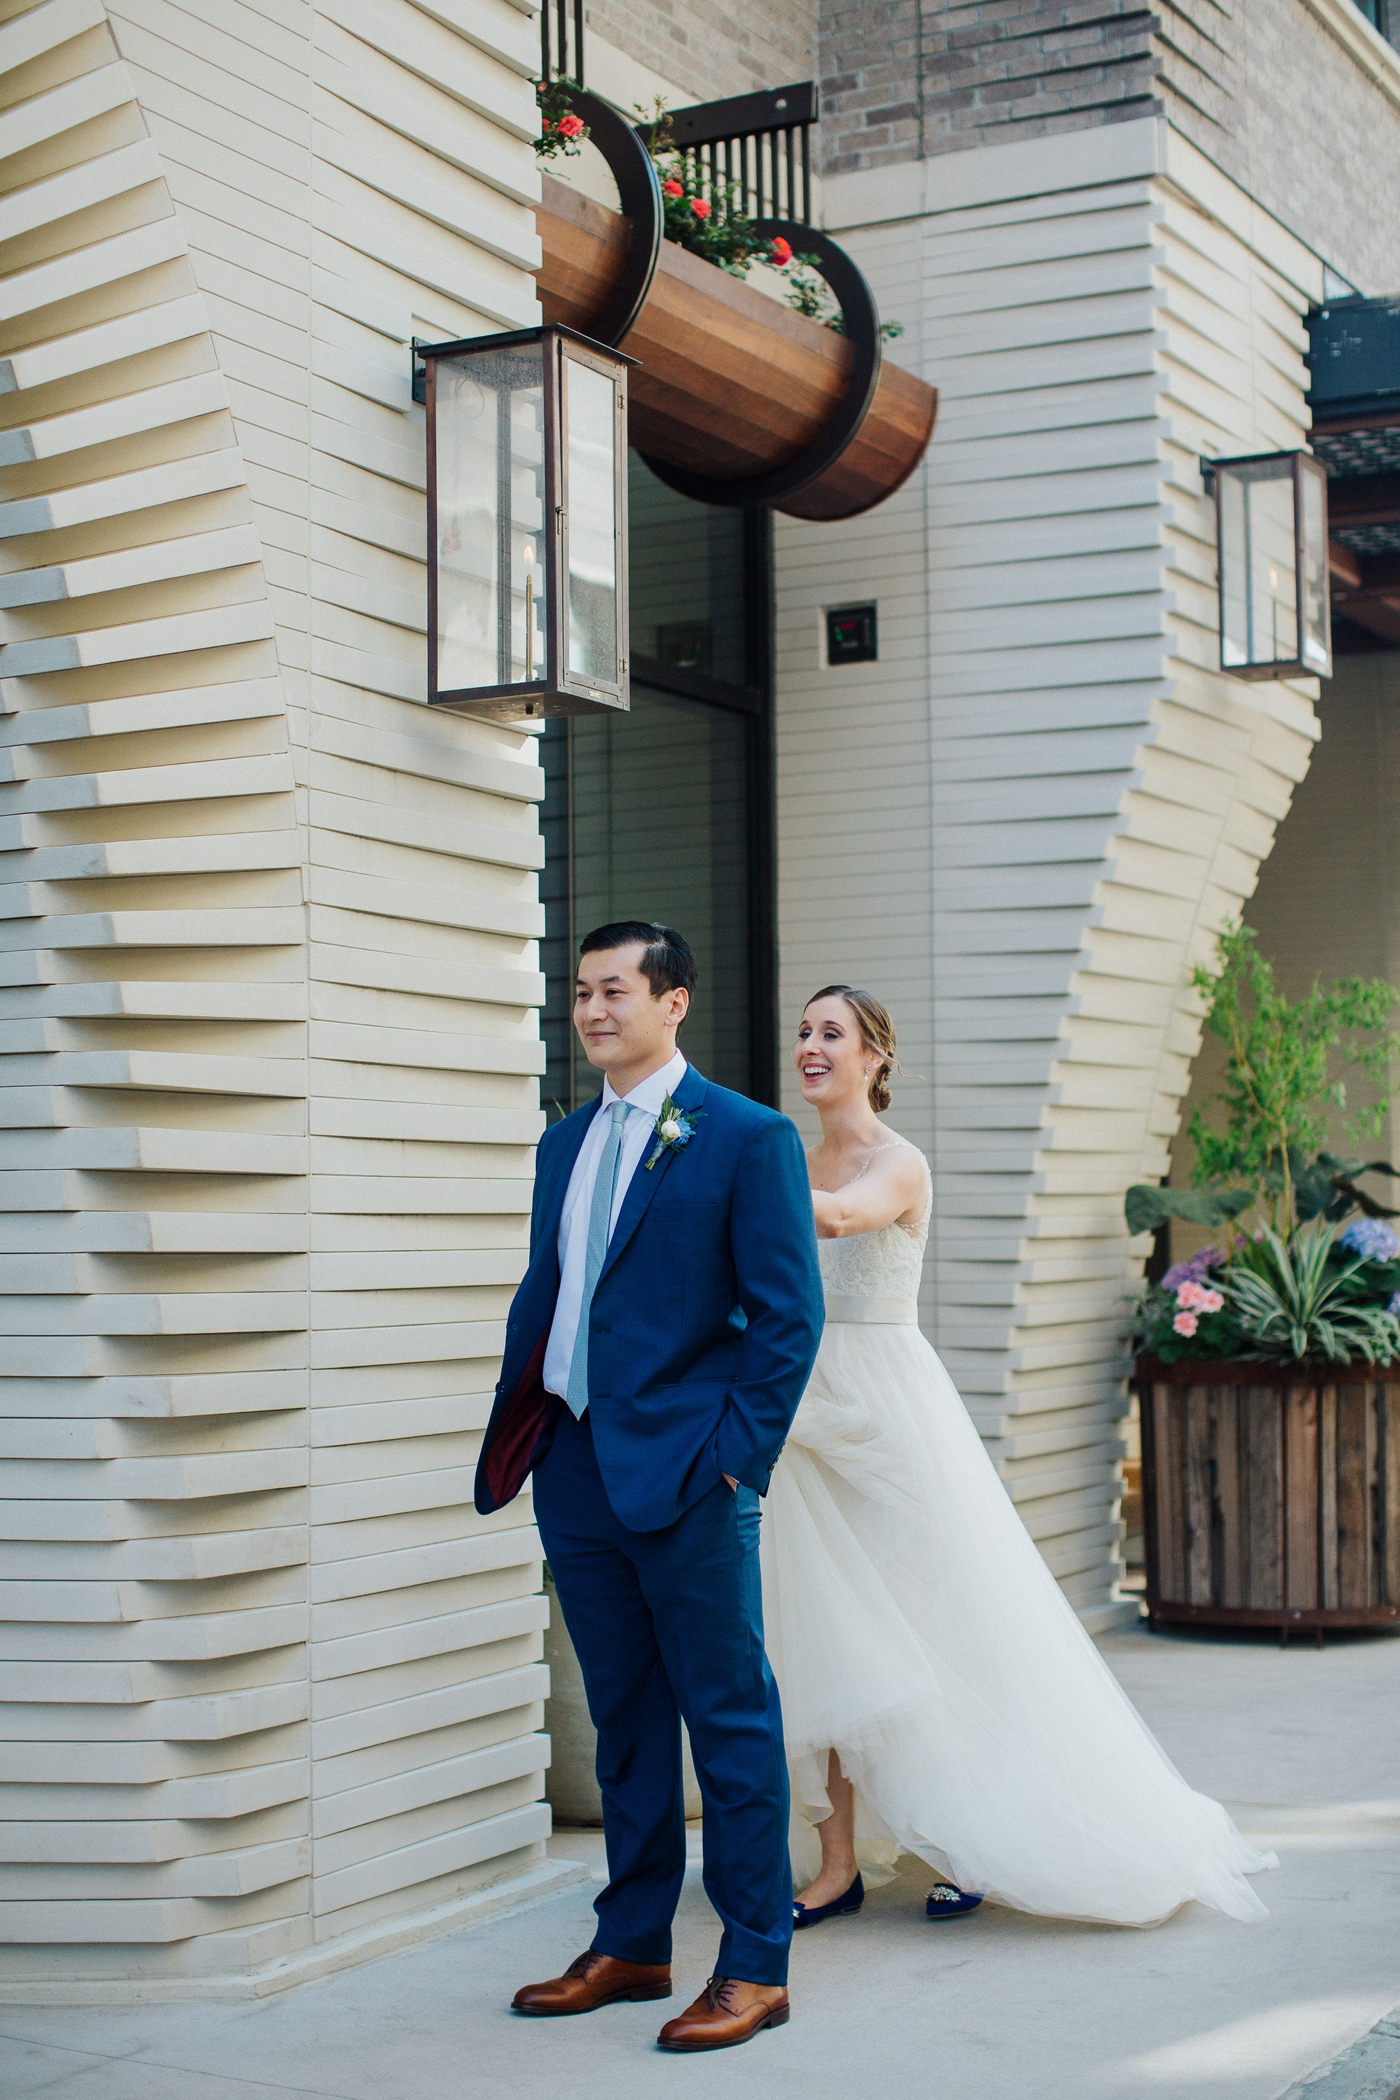 Bride in Cassia Gown by Wtoo from BHLDN